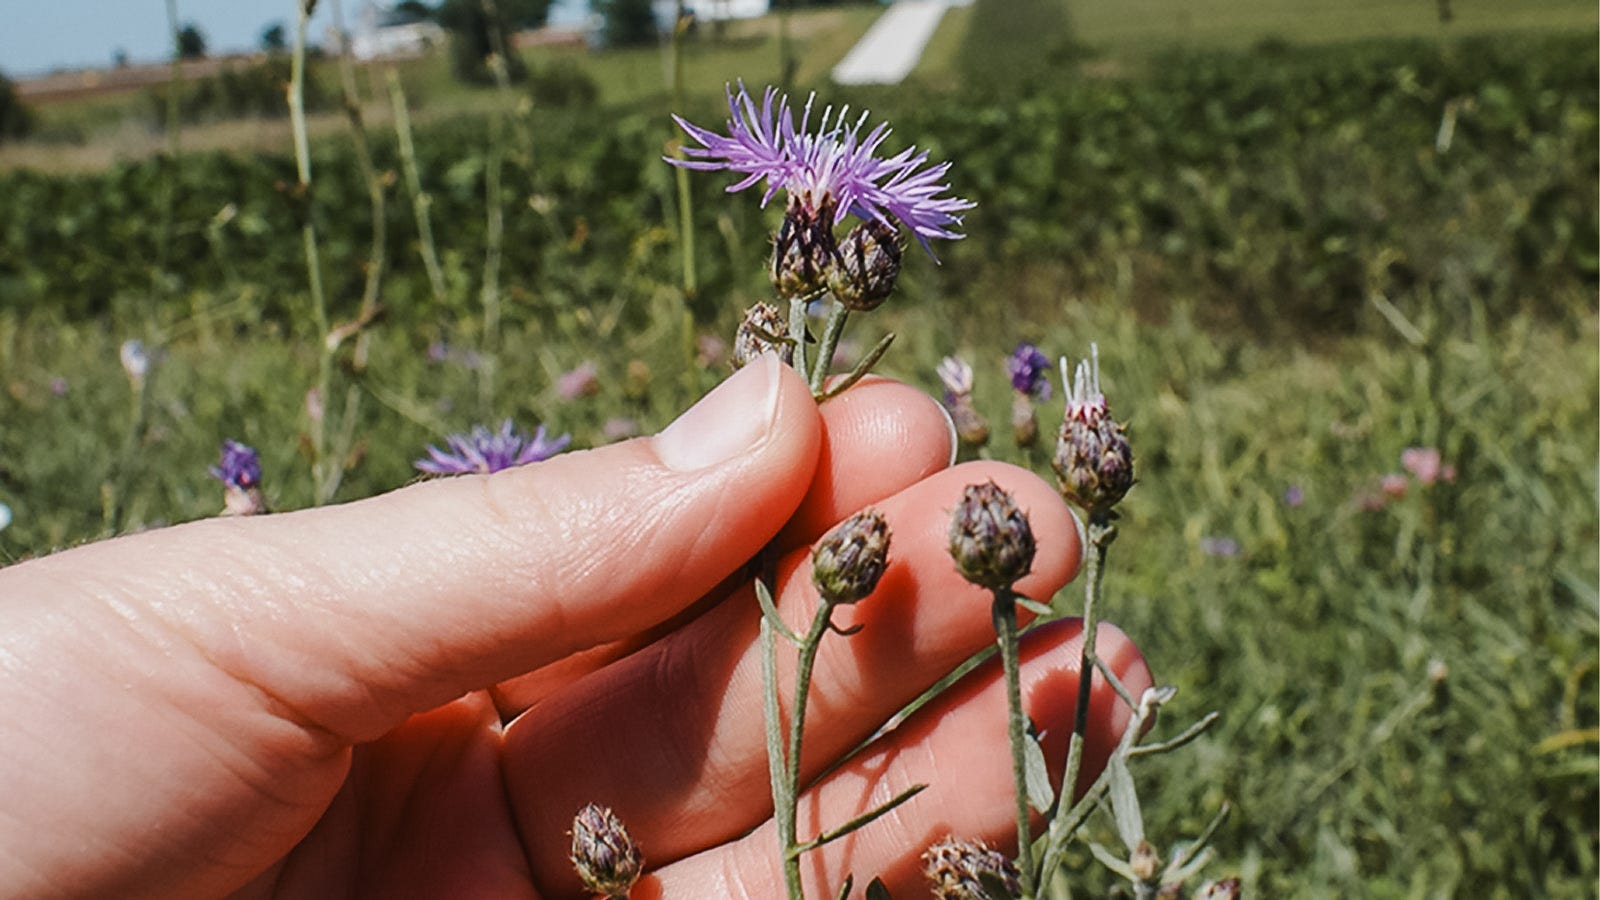 A close up of a hand holding a knapweed in a field